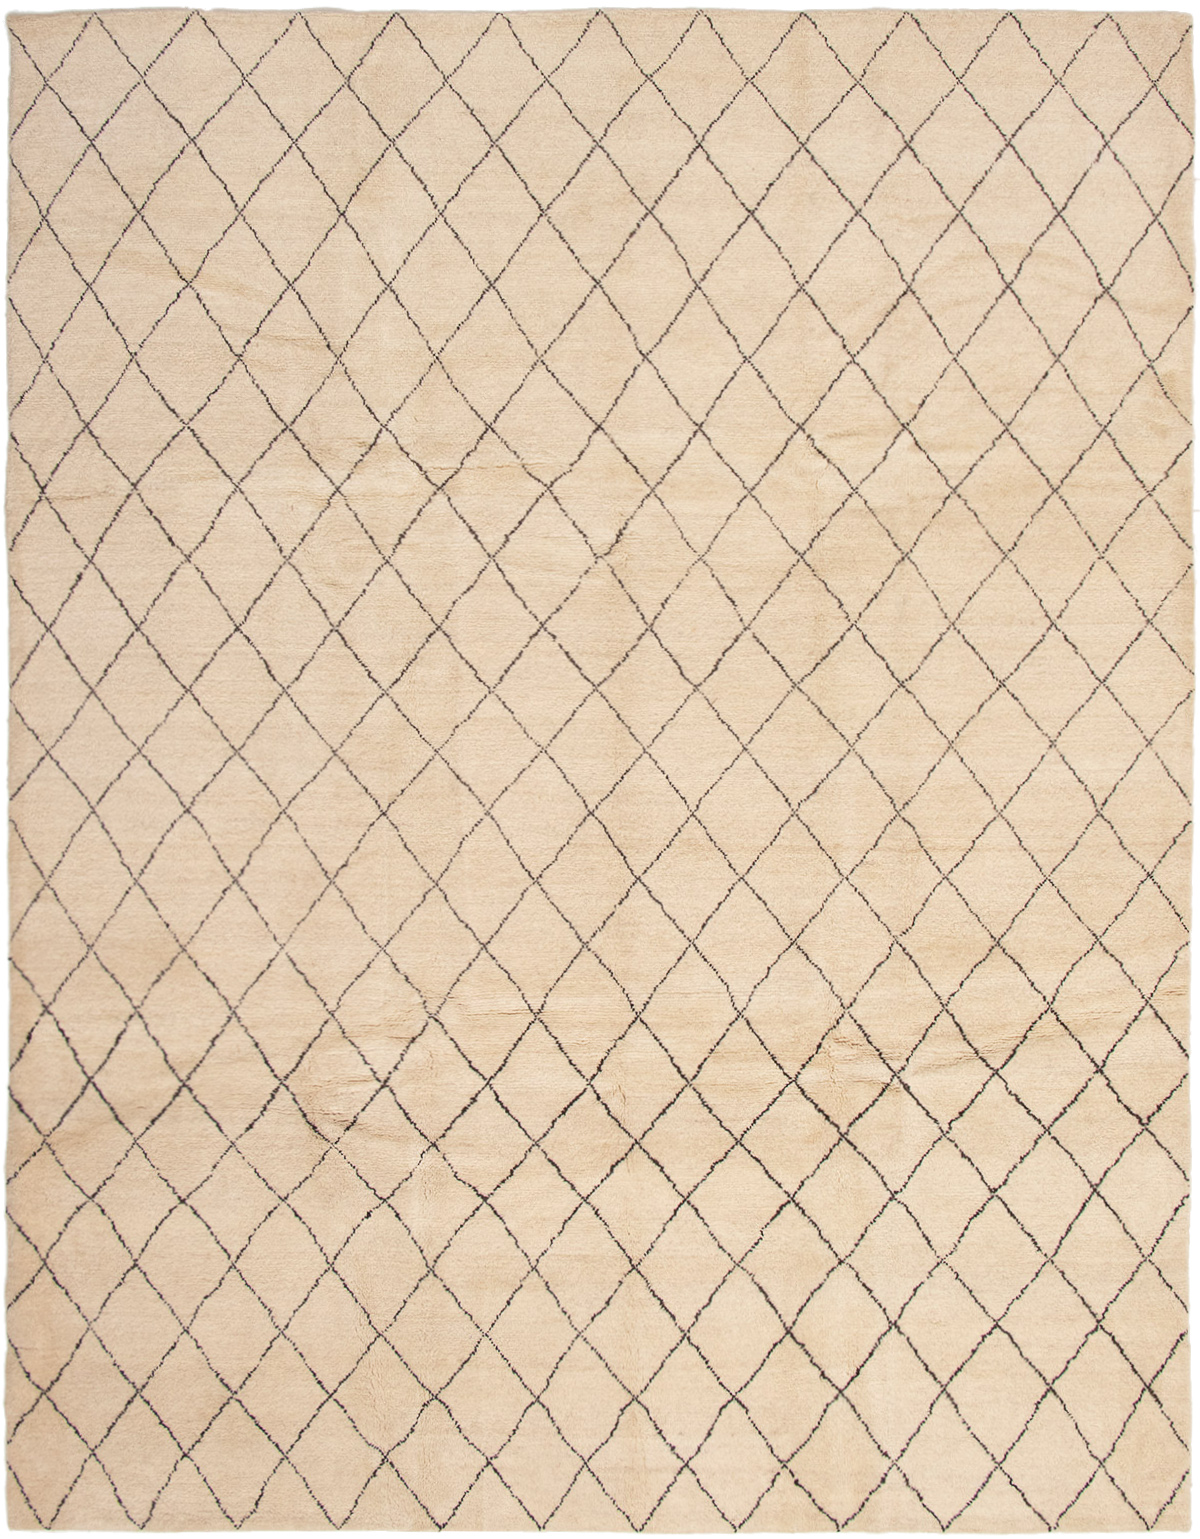 Hand-knotted Arlequin Cream Wool Rug 9'2" x 11'10"  Size: 9'2" x 11'10"  